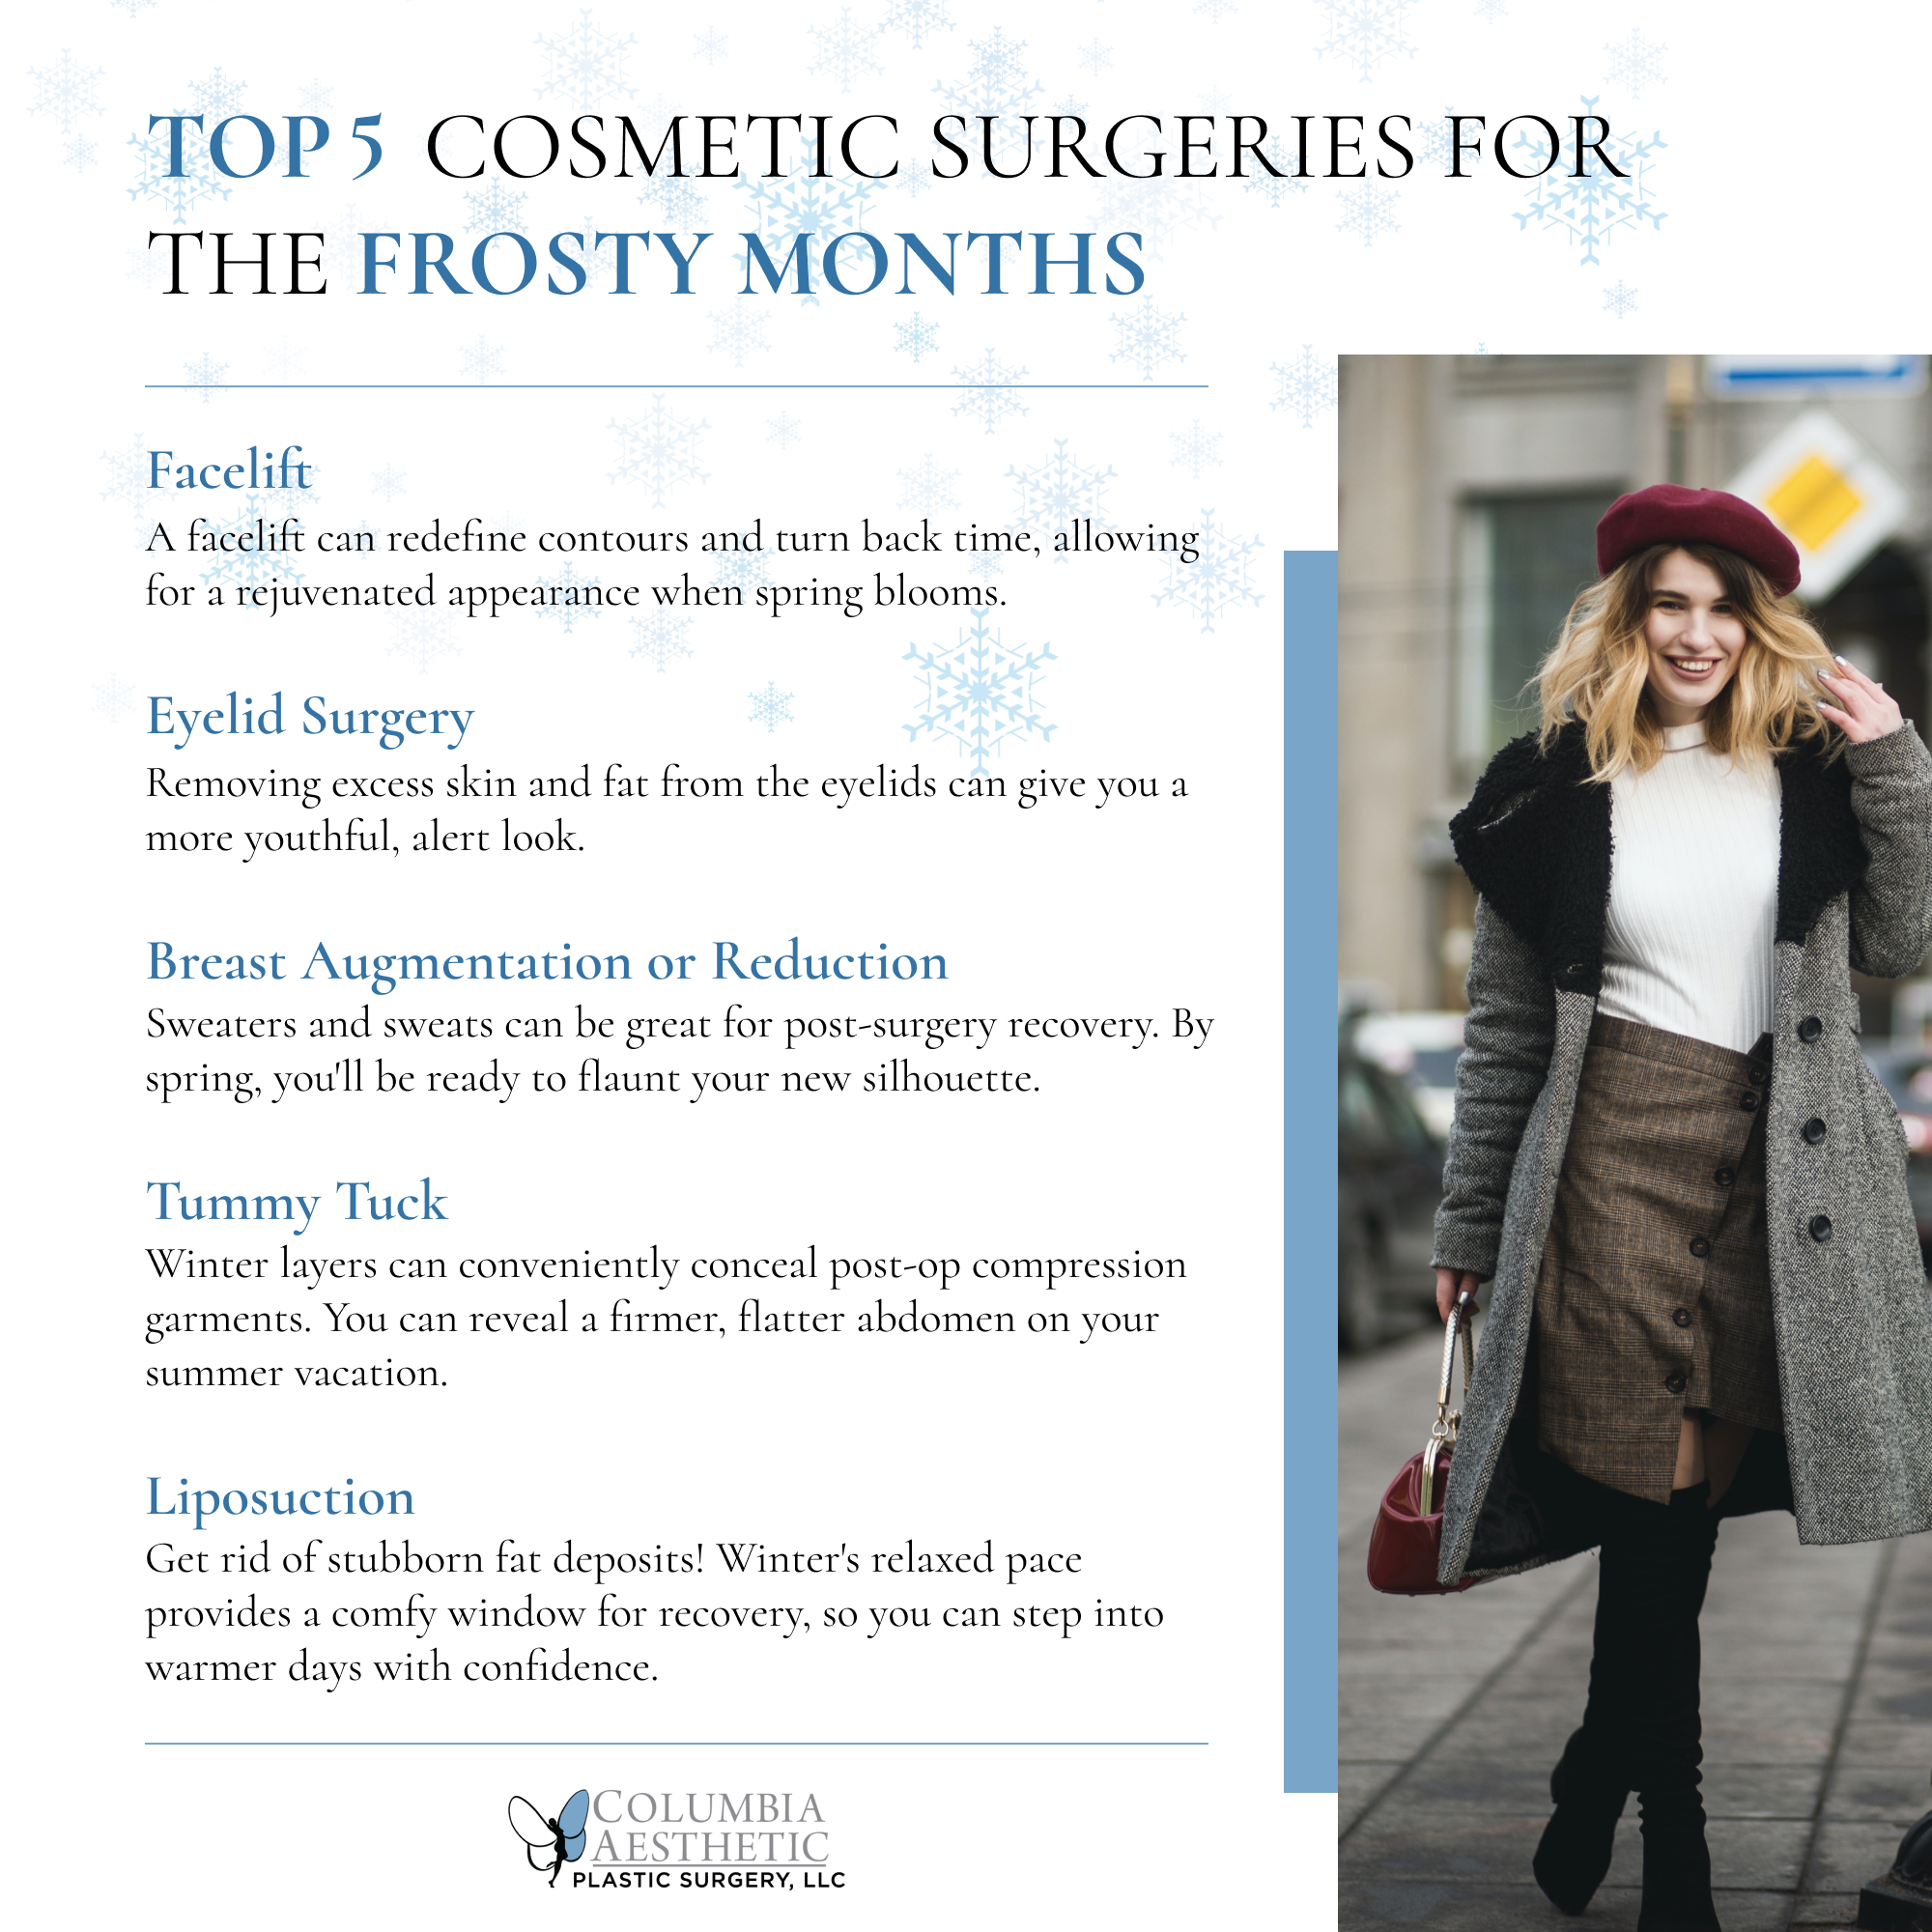 TOP 5 COSMETIC SURGERIES FOR THE FROSTY MONTHS